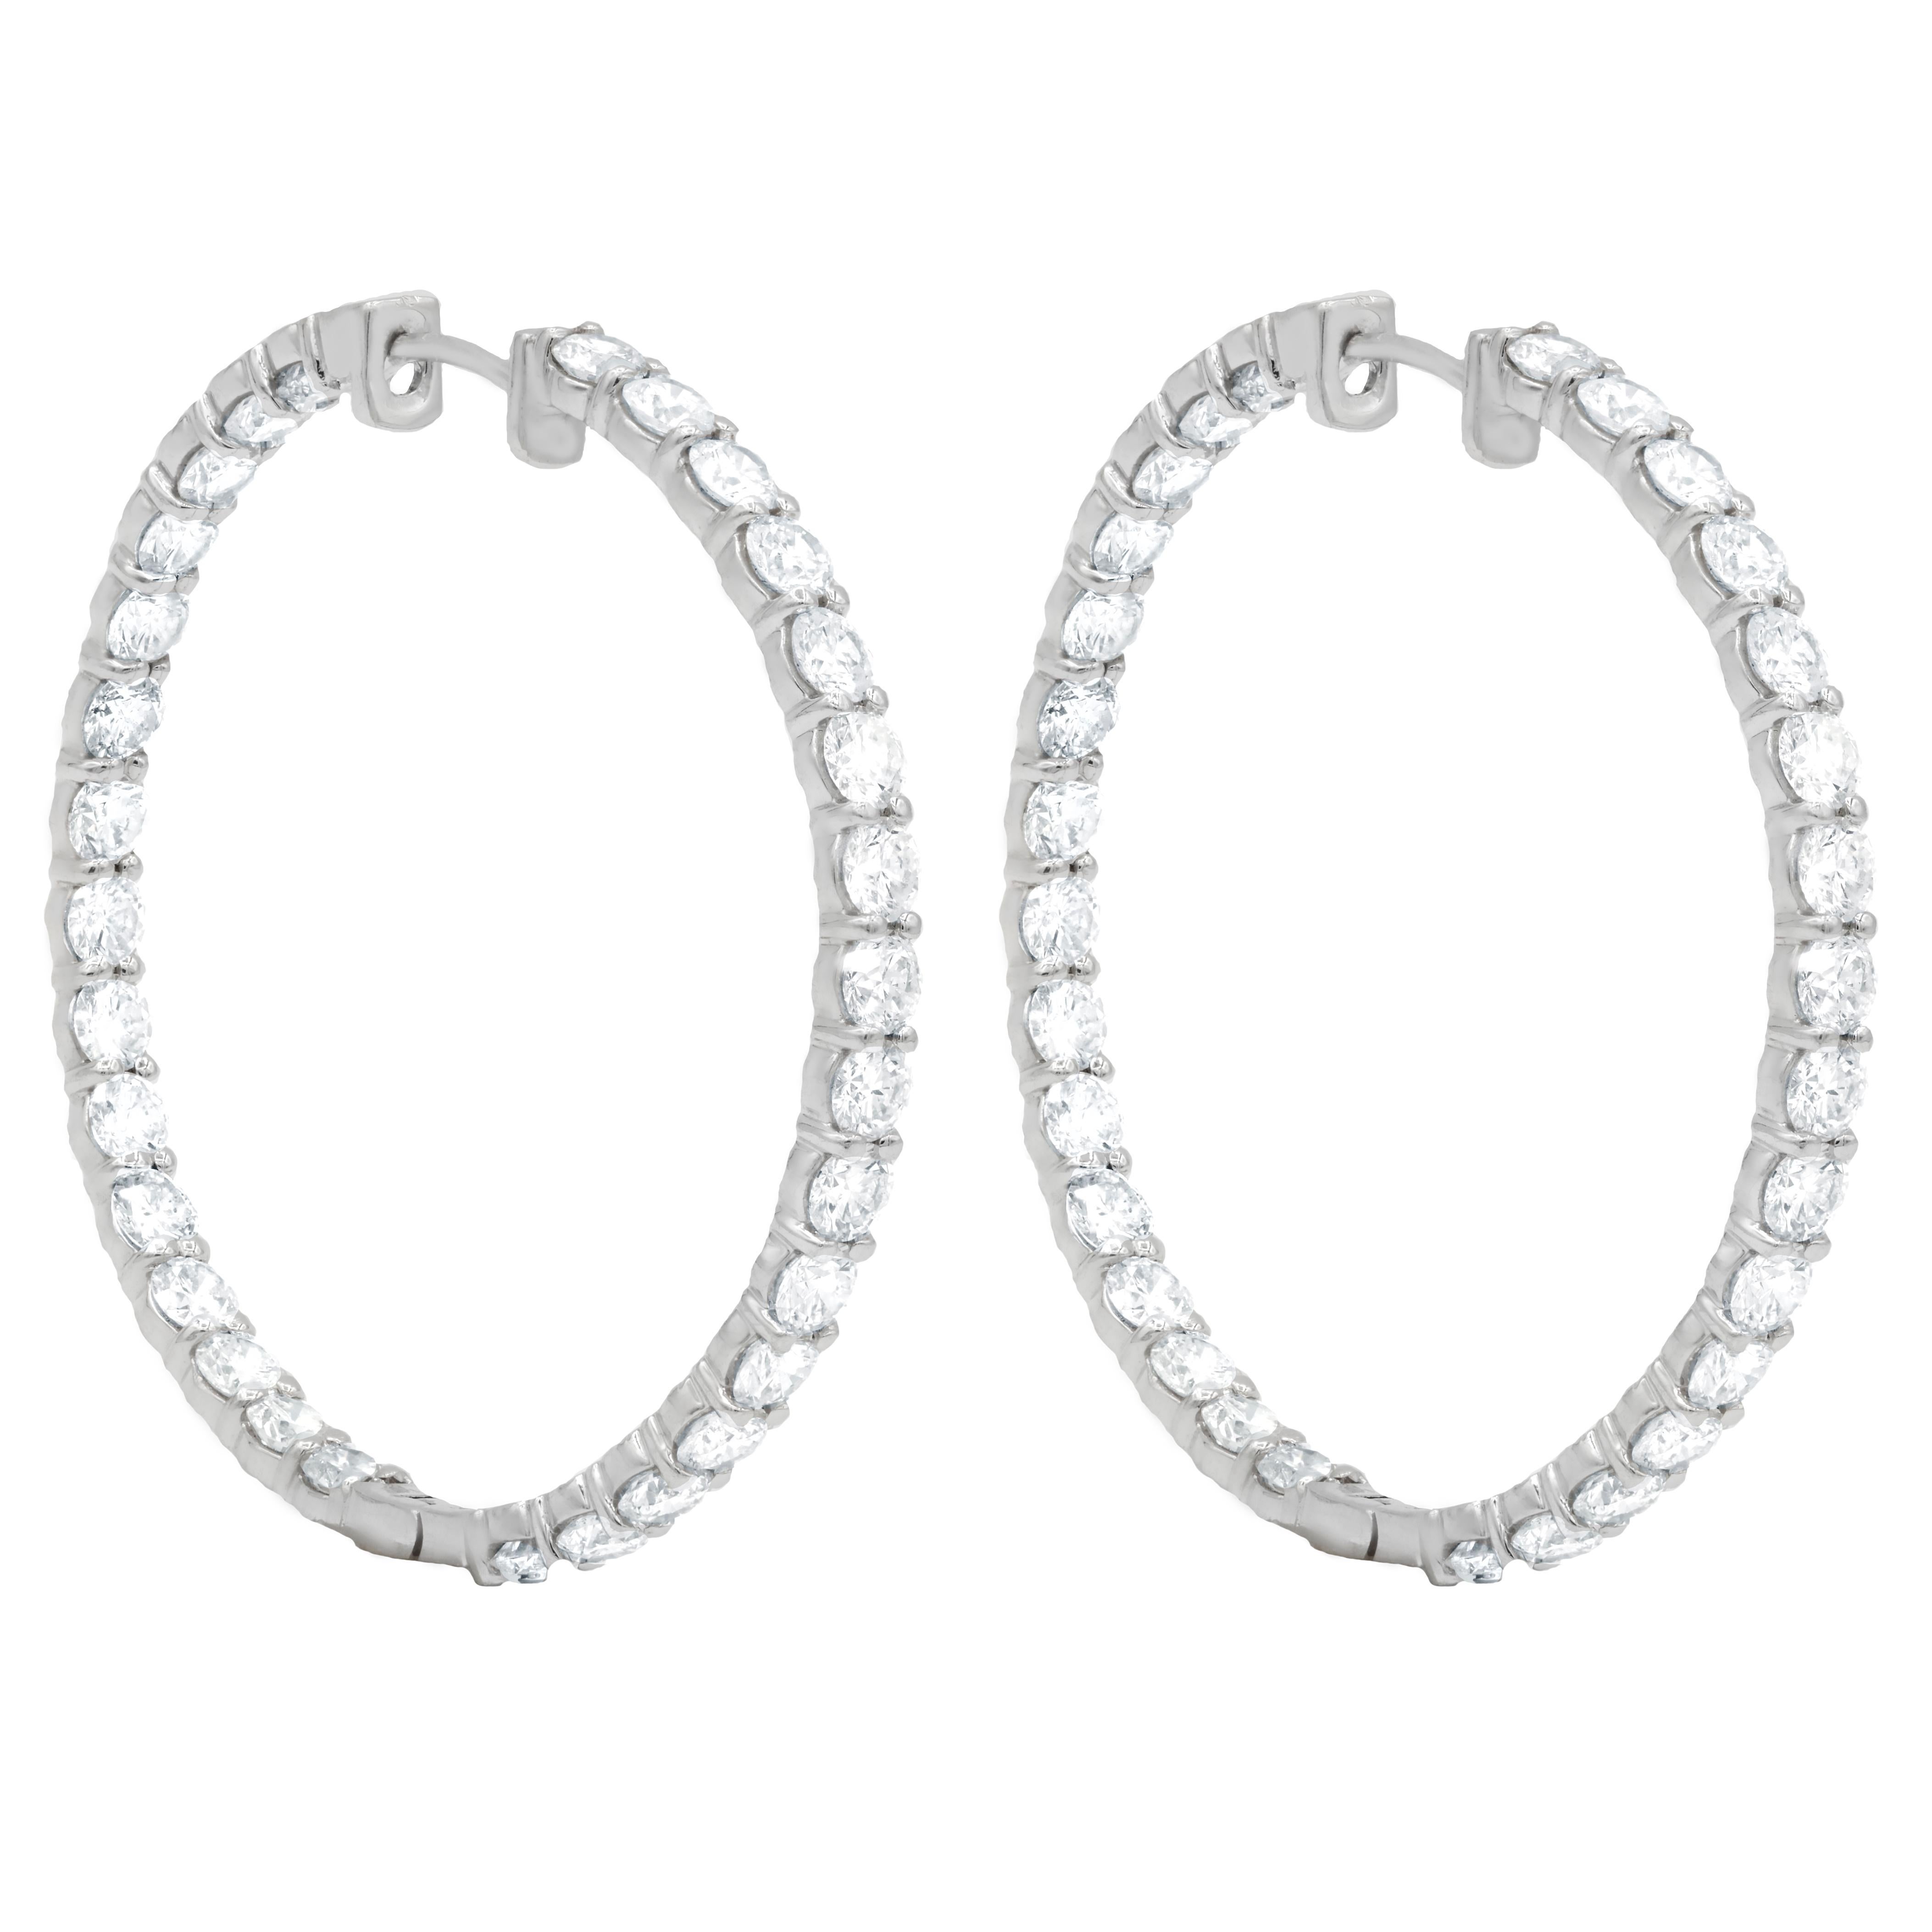 18 kt white gold inside-out hoop earrings adorned with 15.60 cts tw of round diamonds (48 stones)
Diana M. is a leading supplier of top-quality fine jewelry for over 35 years.
Diana M is one-stop shop for all your jewelry shopping, carrying line of